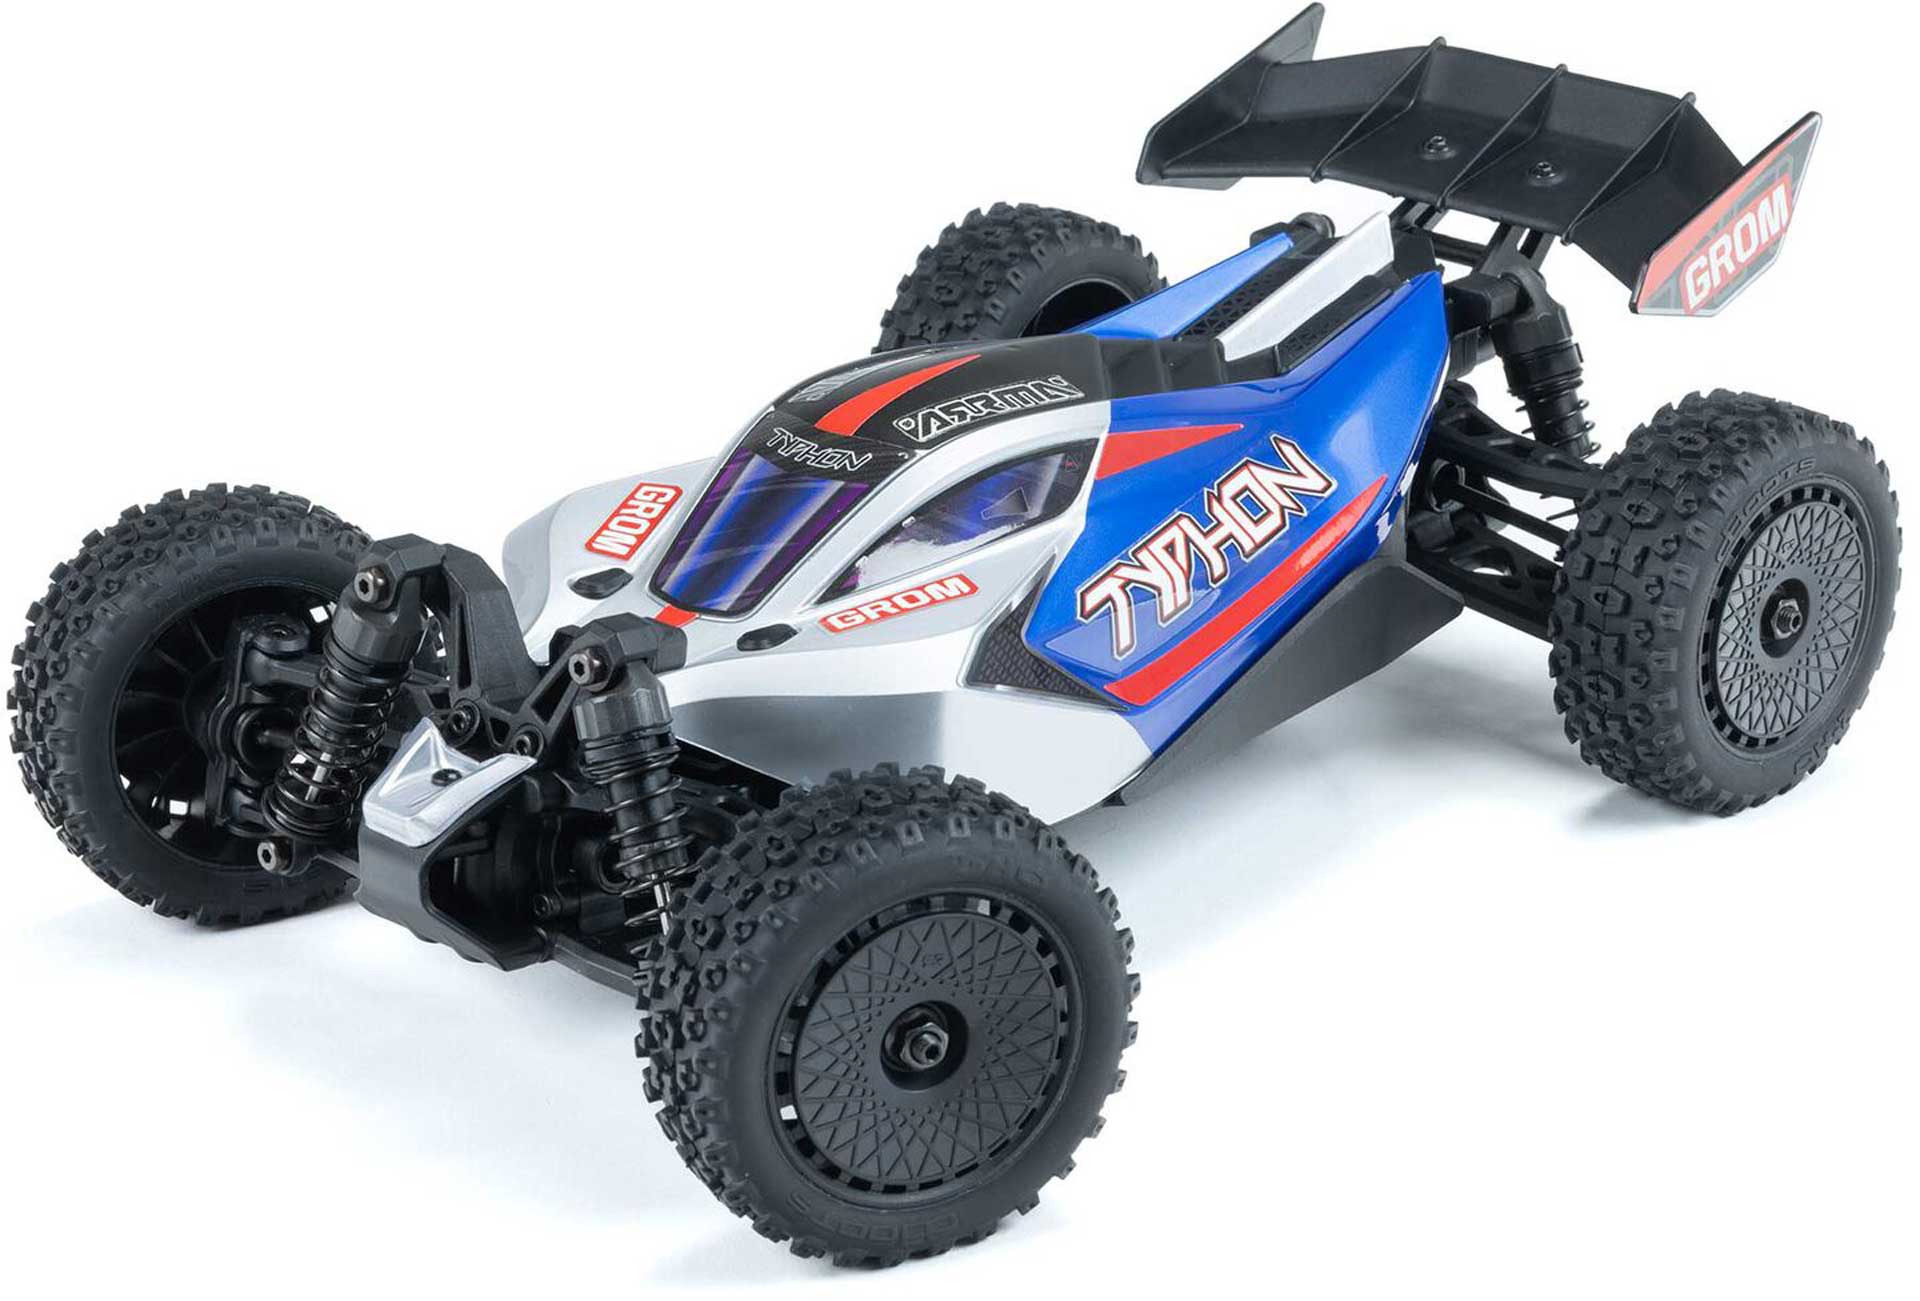 ARRMA TYPHON GROM MEGA 380 Brushed 4X4 Small Scale Buggy RTR with battery & charger, blue/silver